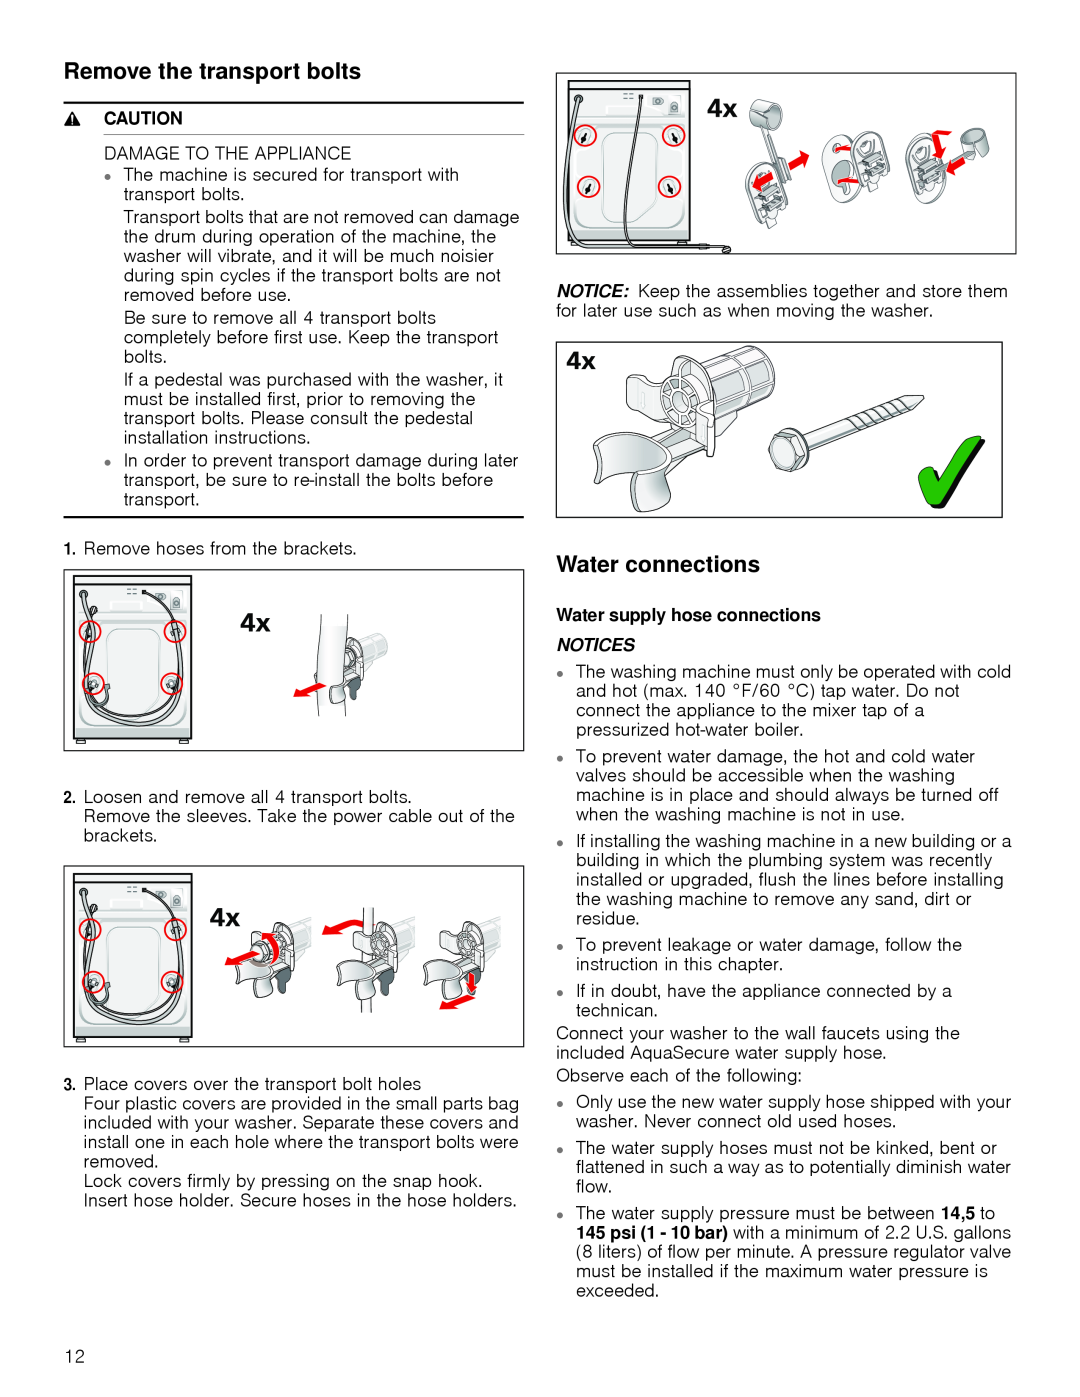 Bosch Appliances WAP24201UC Remove the transport bolts, Water connections, Water supply hose connections, Caution, Notices 